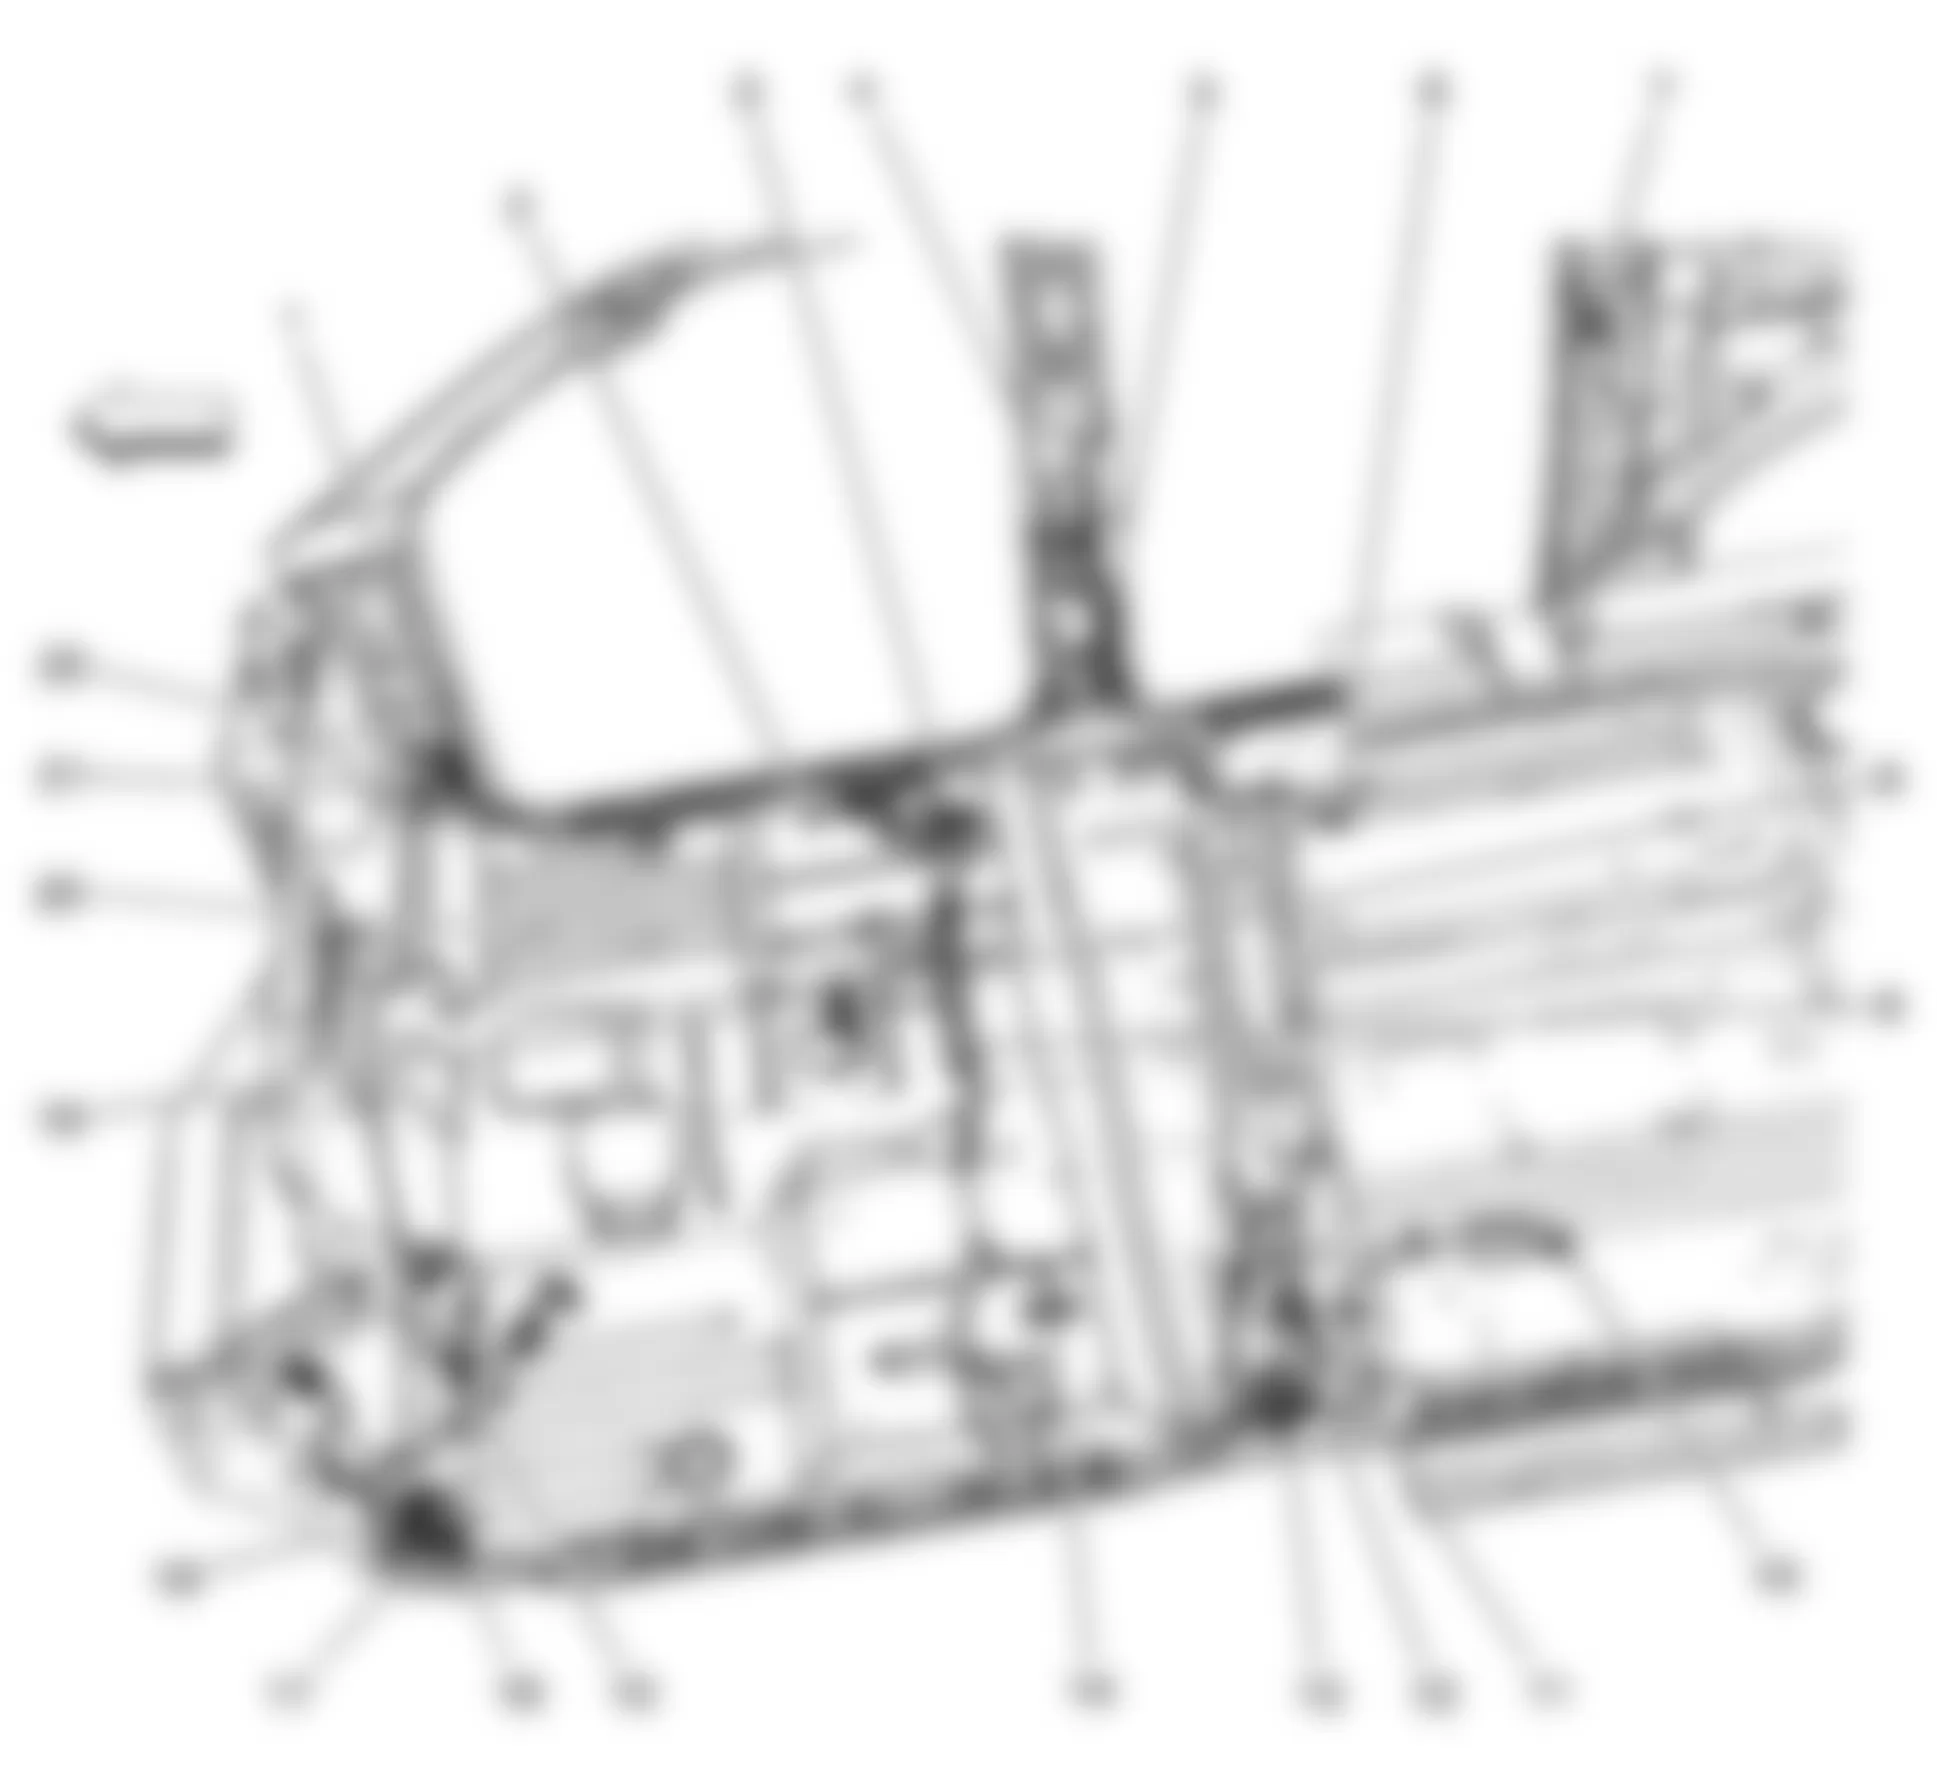 GMC Yukon 2010 - Component Locations -  Front Passenger Compartment (Long Wheel Base)